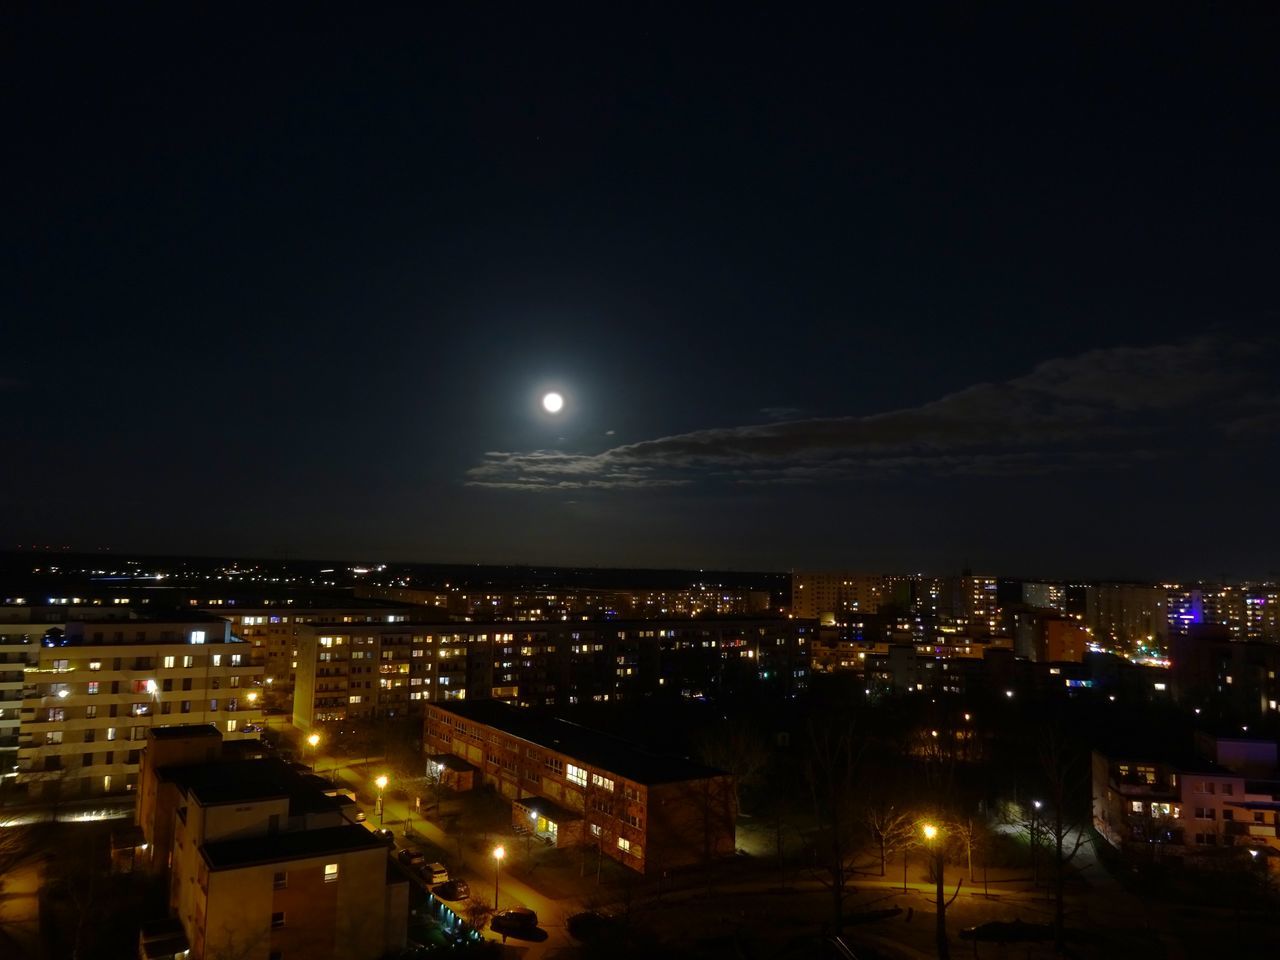 night, architecture, building exterior, moon, illuminated, city, built structure, cityscape, sky, building, evening, darkness, dusk, light, no people, nature, high angle view, full moon, city life, residential district, travel destinations, outdoors, horizon, urban skyline, dark, copy space, skyline